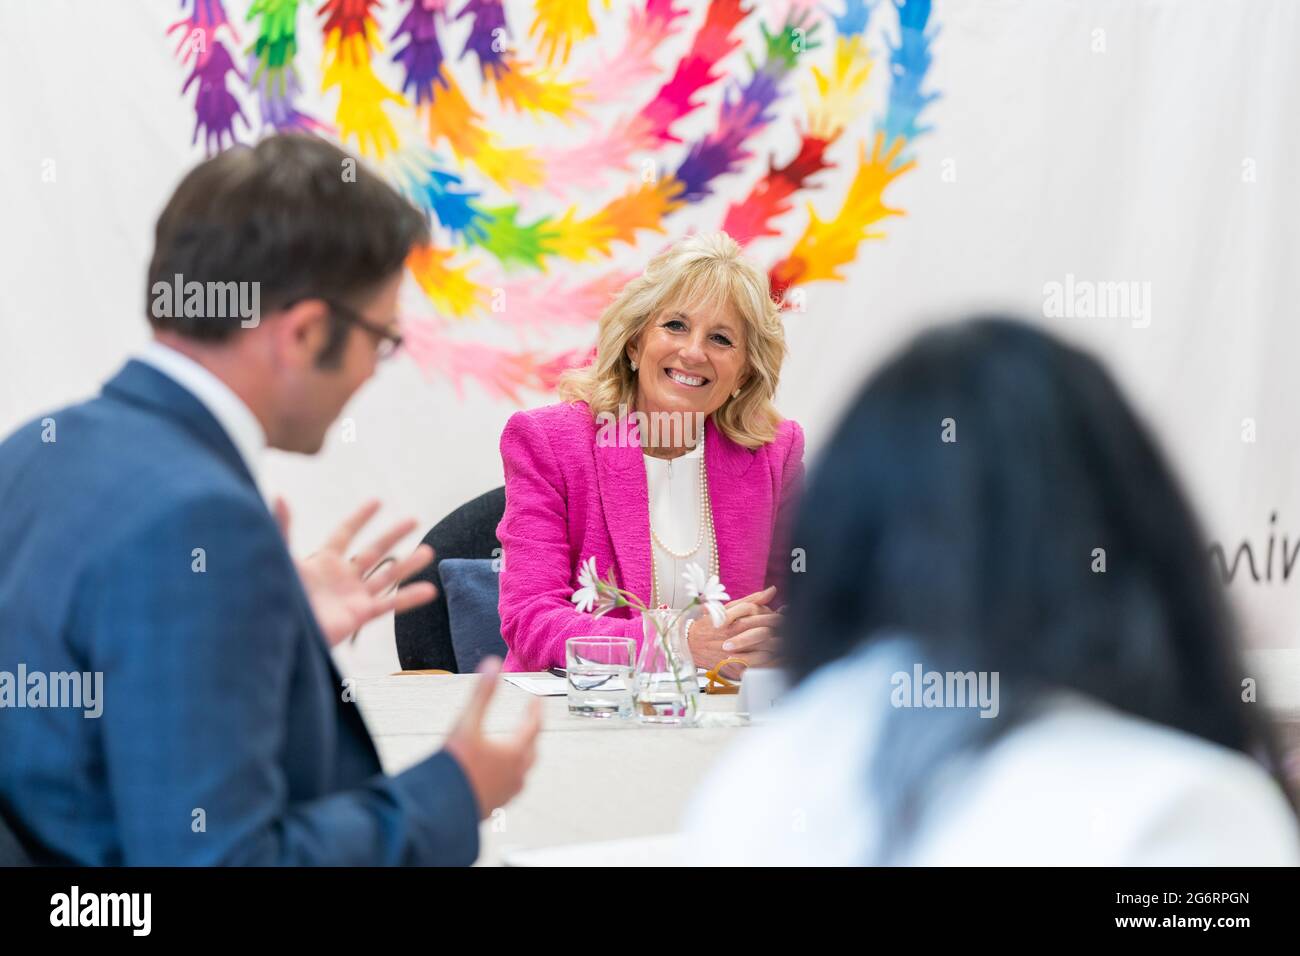 First Lady Jill Biden and Catherine, the Duchess of Cambridge participate in a roundtable discussion at Connor Downs Academy Friday, June 11, 2021 in Hayle, Cornwall, England. (Official White House Photo by Cameron Smith via Sipa USA)  Please note: Fees charged by the agency are for the agency’s services only, and do not, nor are they intended to, convey to the user any ownership of Copyright or License in the material. The agency does not claim any ownership including but not limited to Copyright or License in the attached material. By publishing this material you expressly agree to indemnify Stock Photo